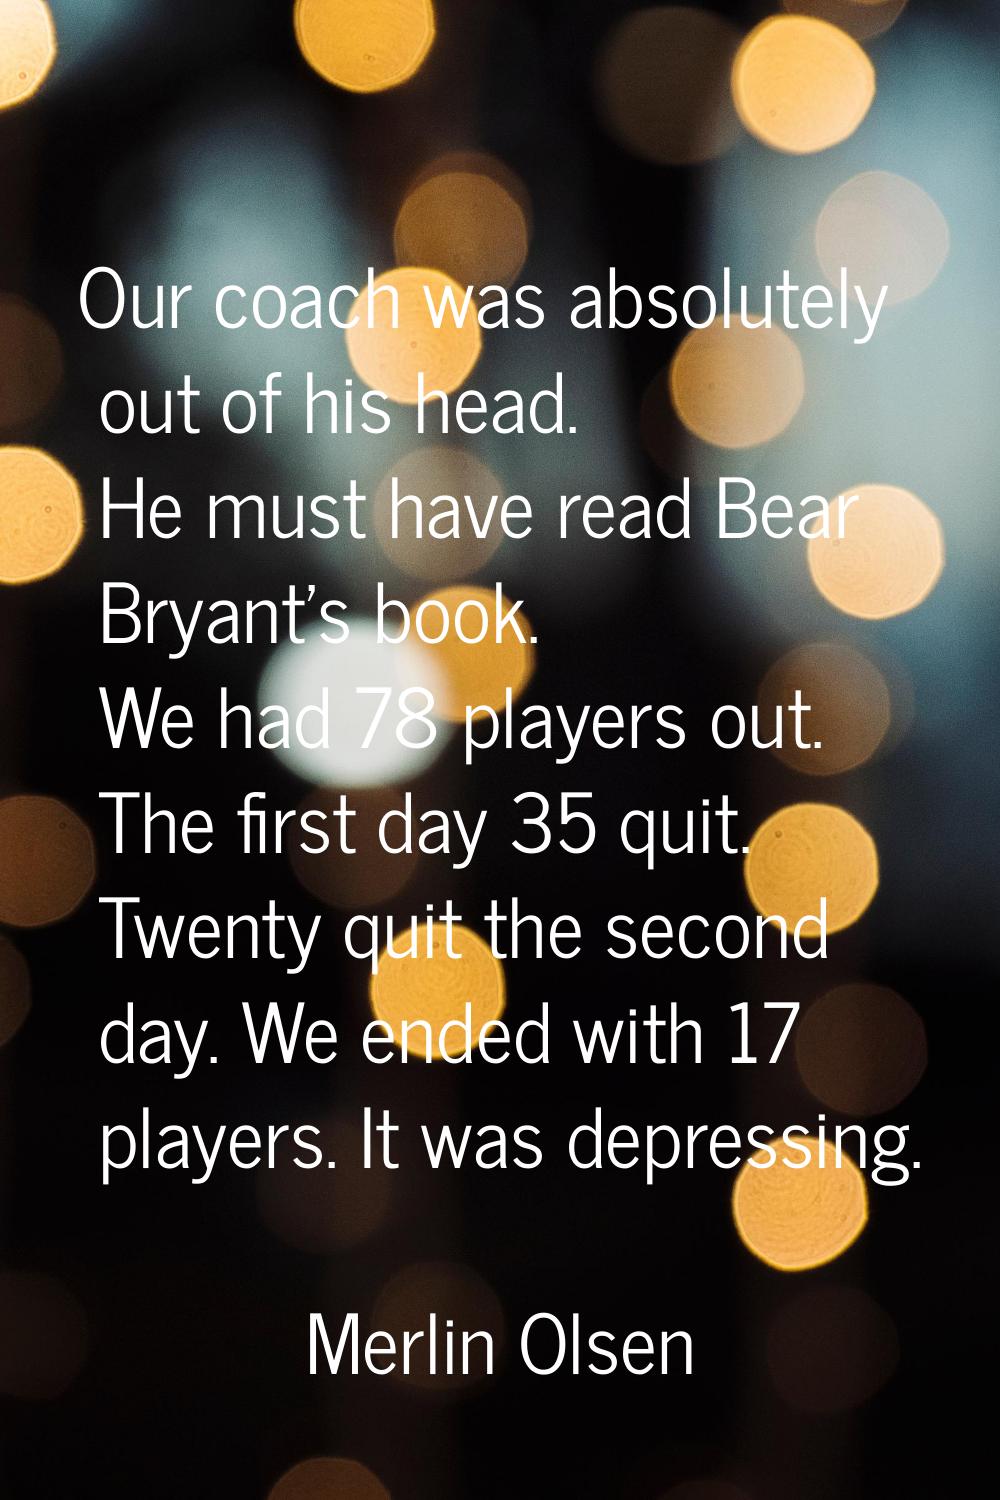 Our coach was absolutely out of his head. He must have read Bear Bryant's book. We had 78 players o